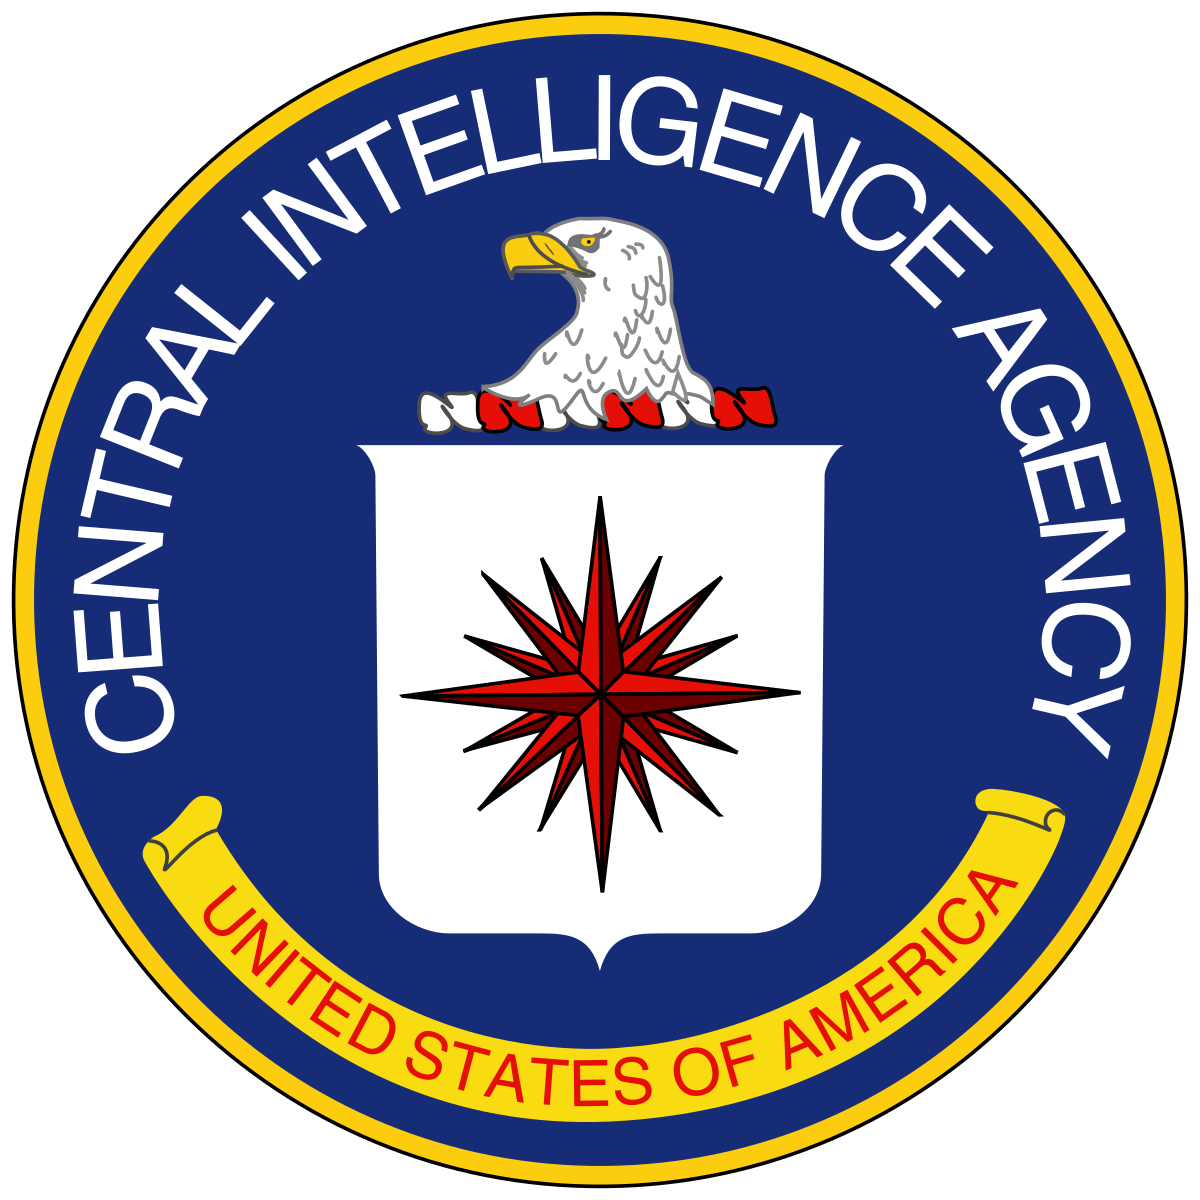 Upcoming Central Intelligence Agency Information Events Announce 